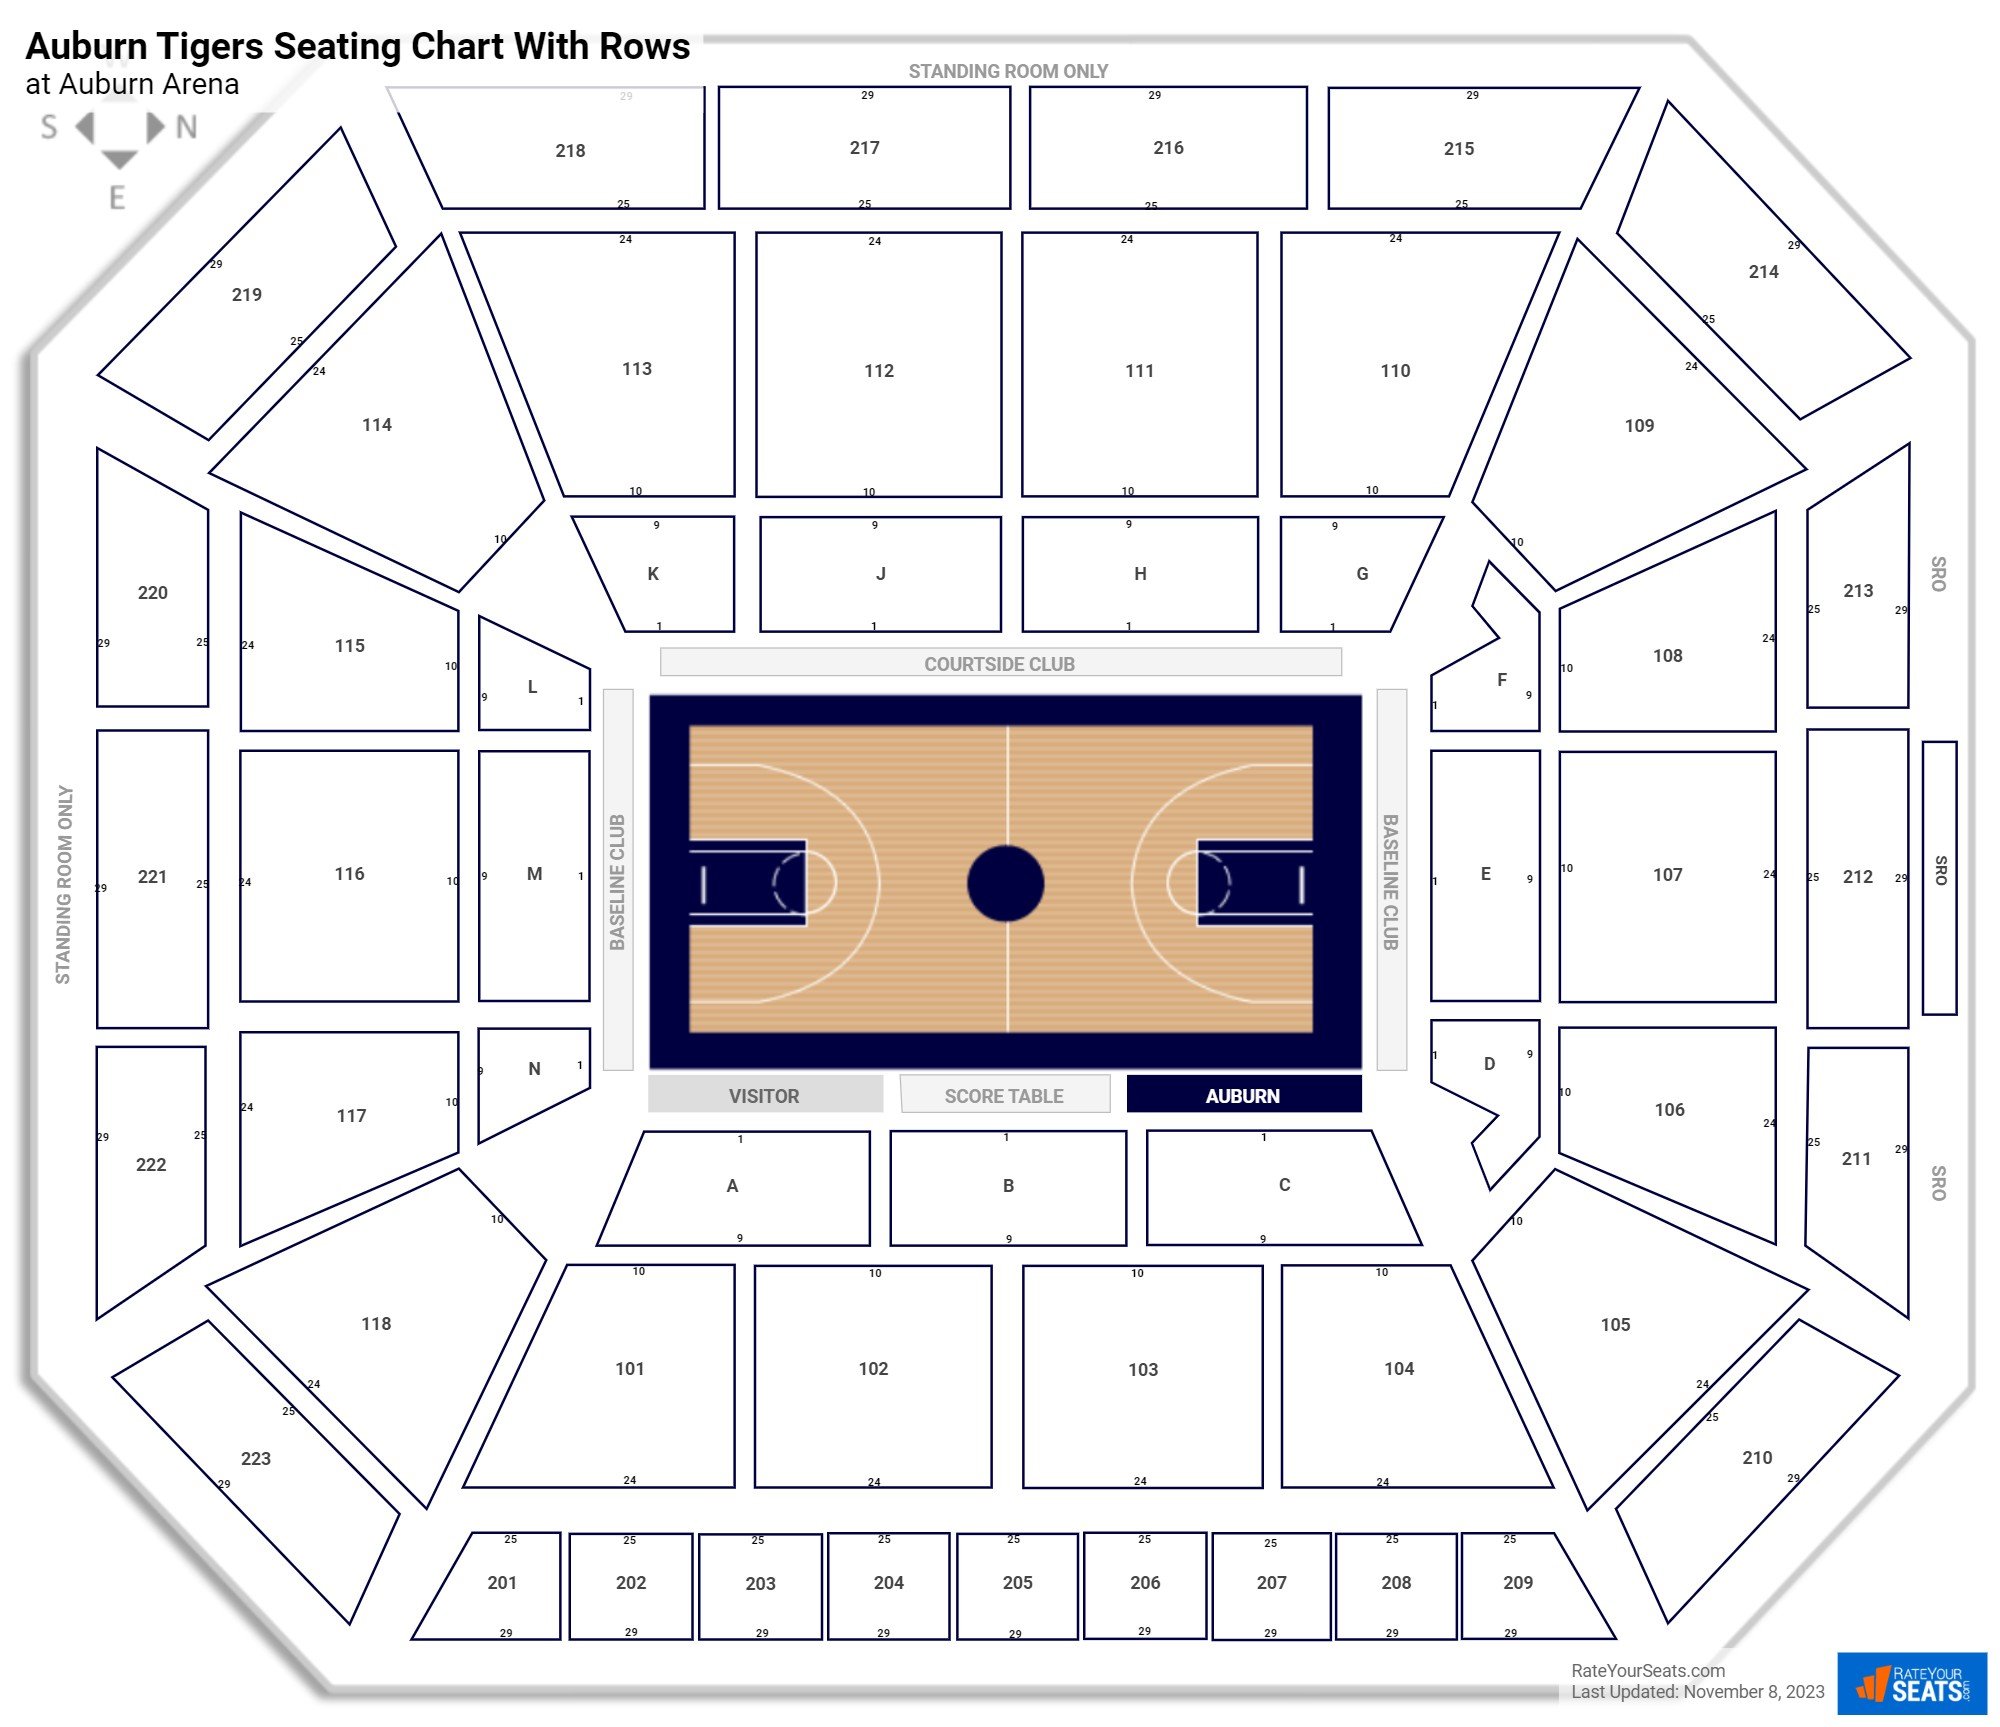 Auburn Arena seating chart with row numbers